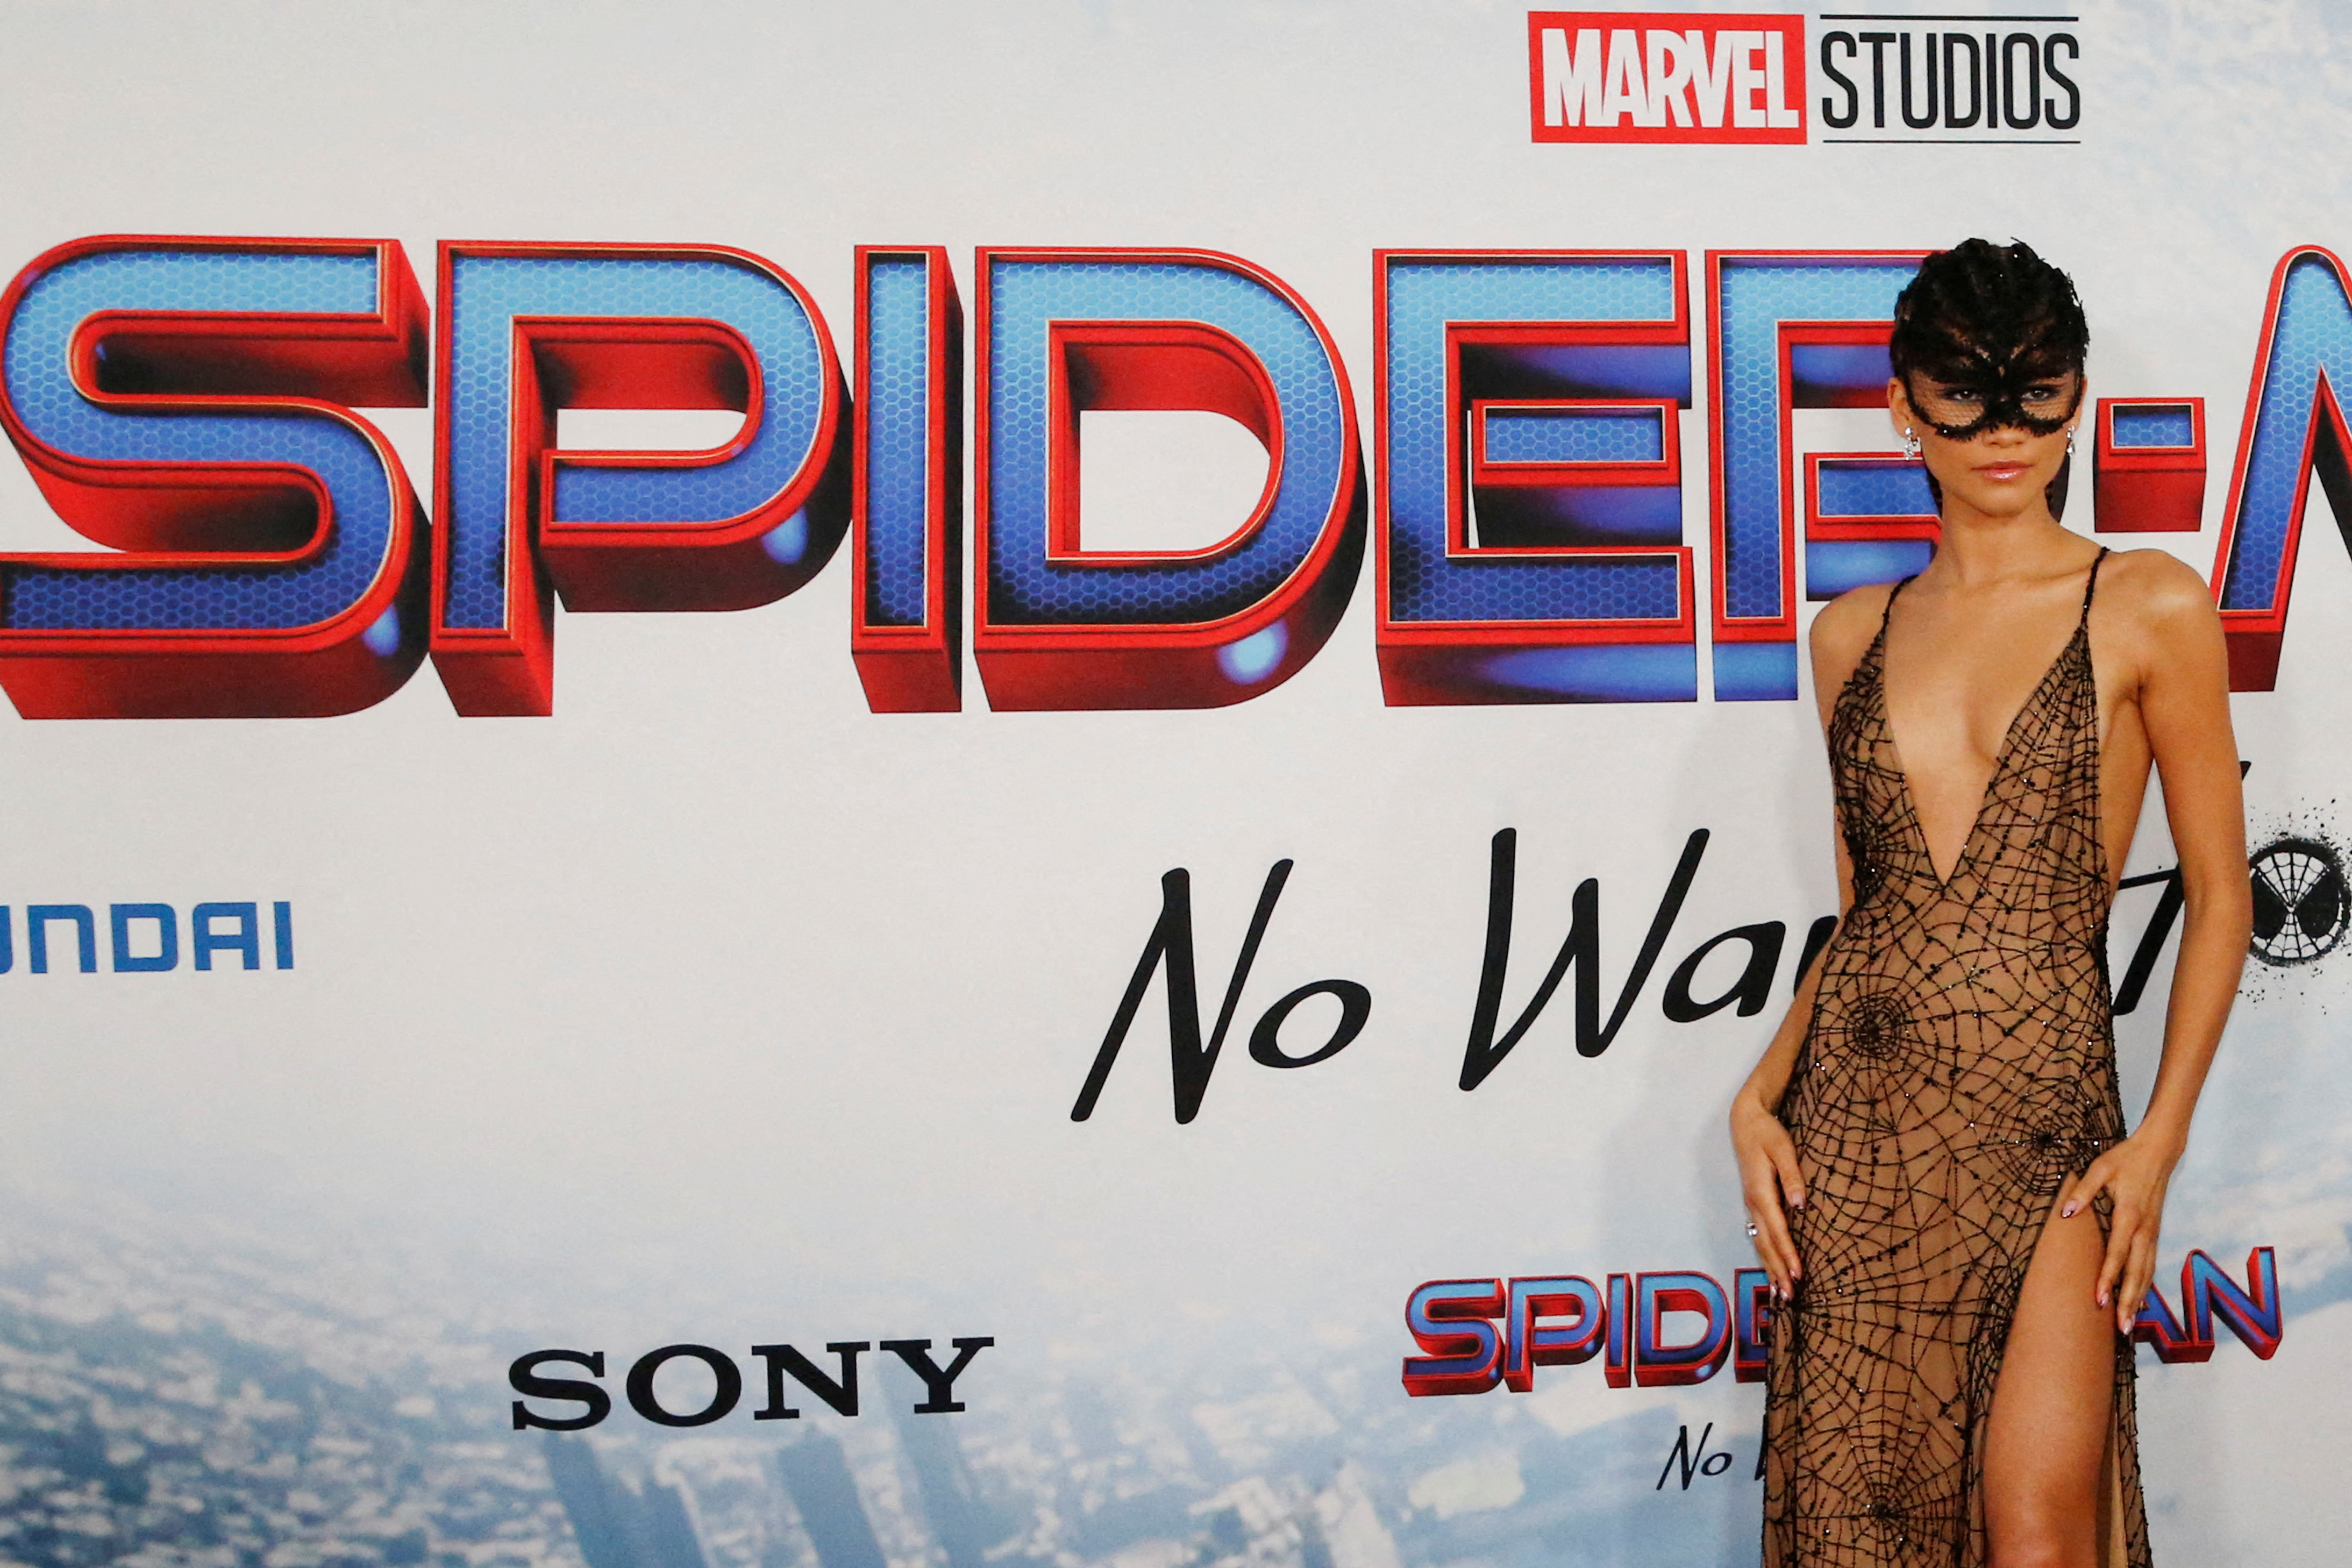 Cast member Zendaya attends the premiere for the film Spider-Man: No Way Home in Los Angeles, California, December 13, 2021. REUTERS/Mario Anzuoni/File Photo